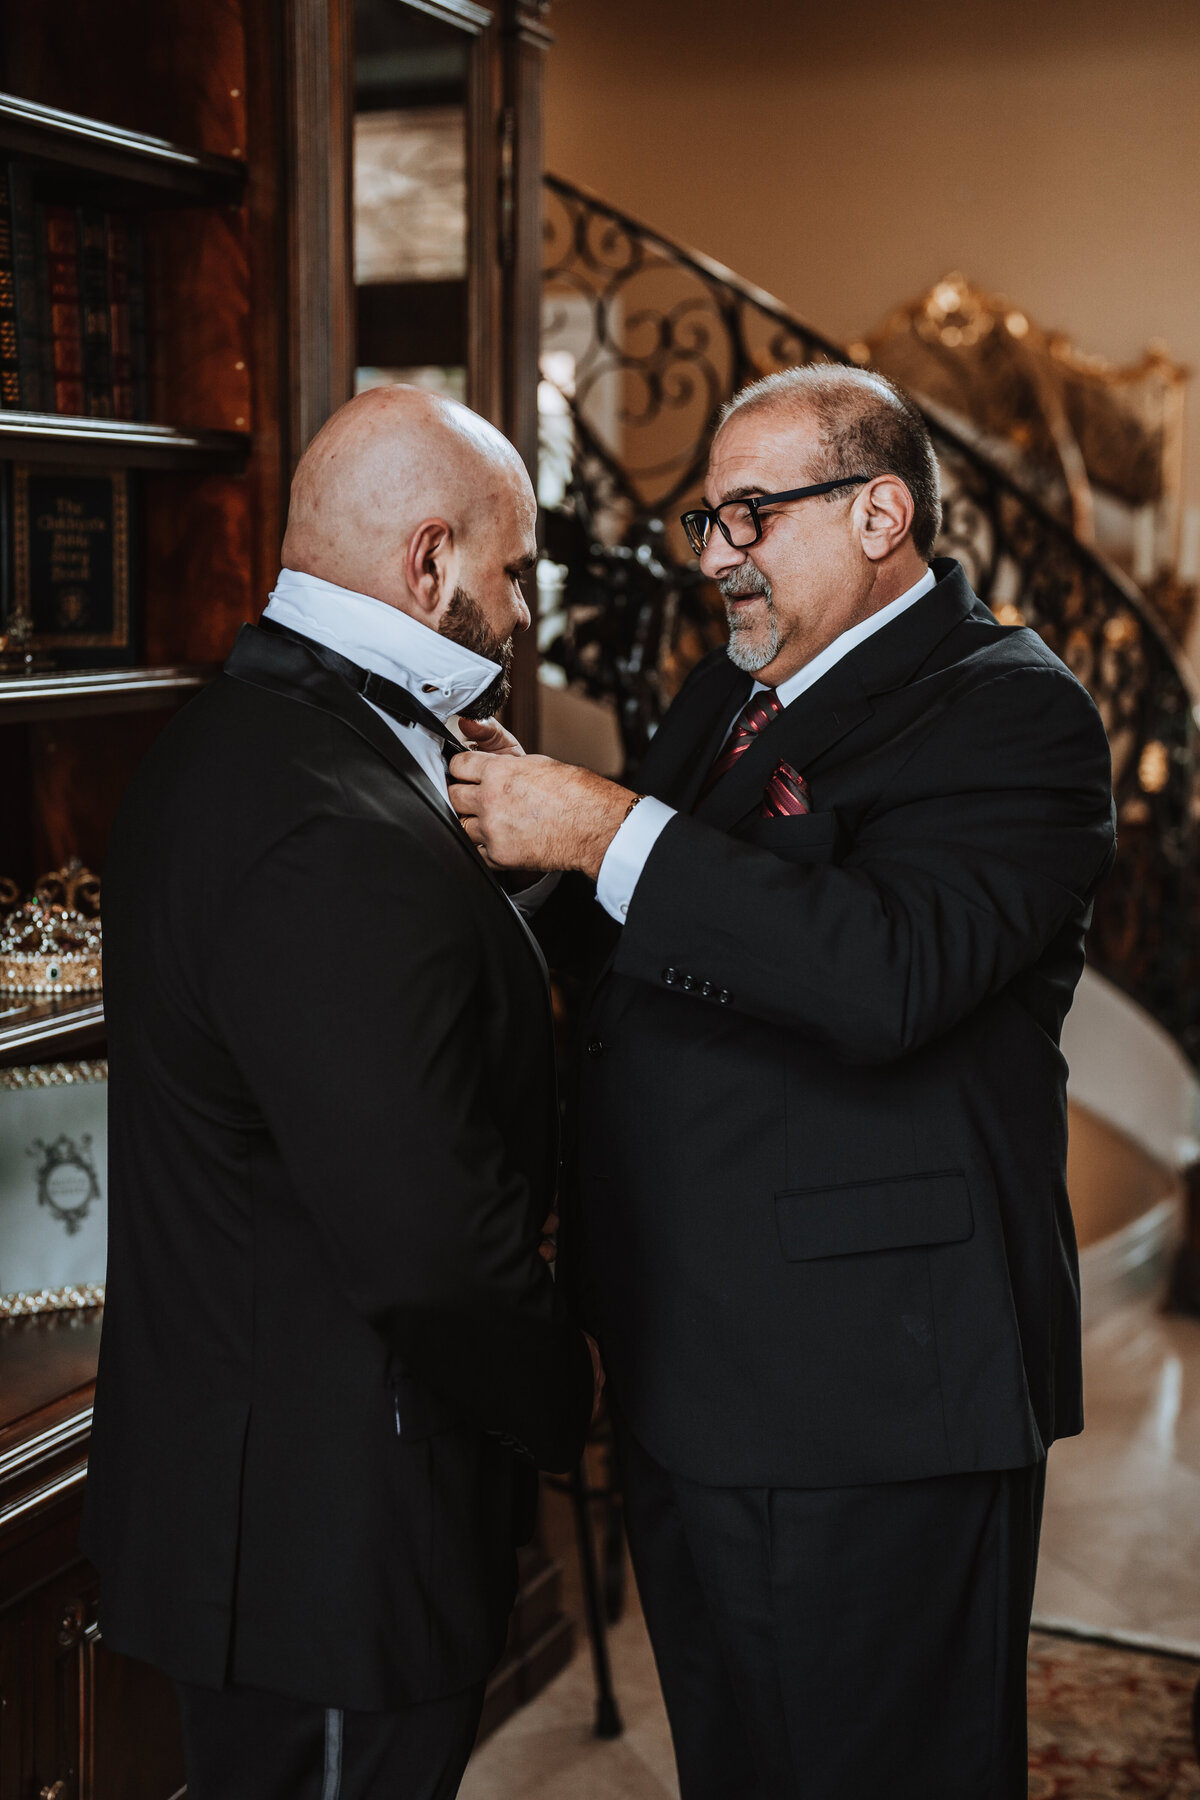 dad helping his son the groom put on his bowtie